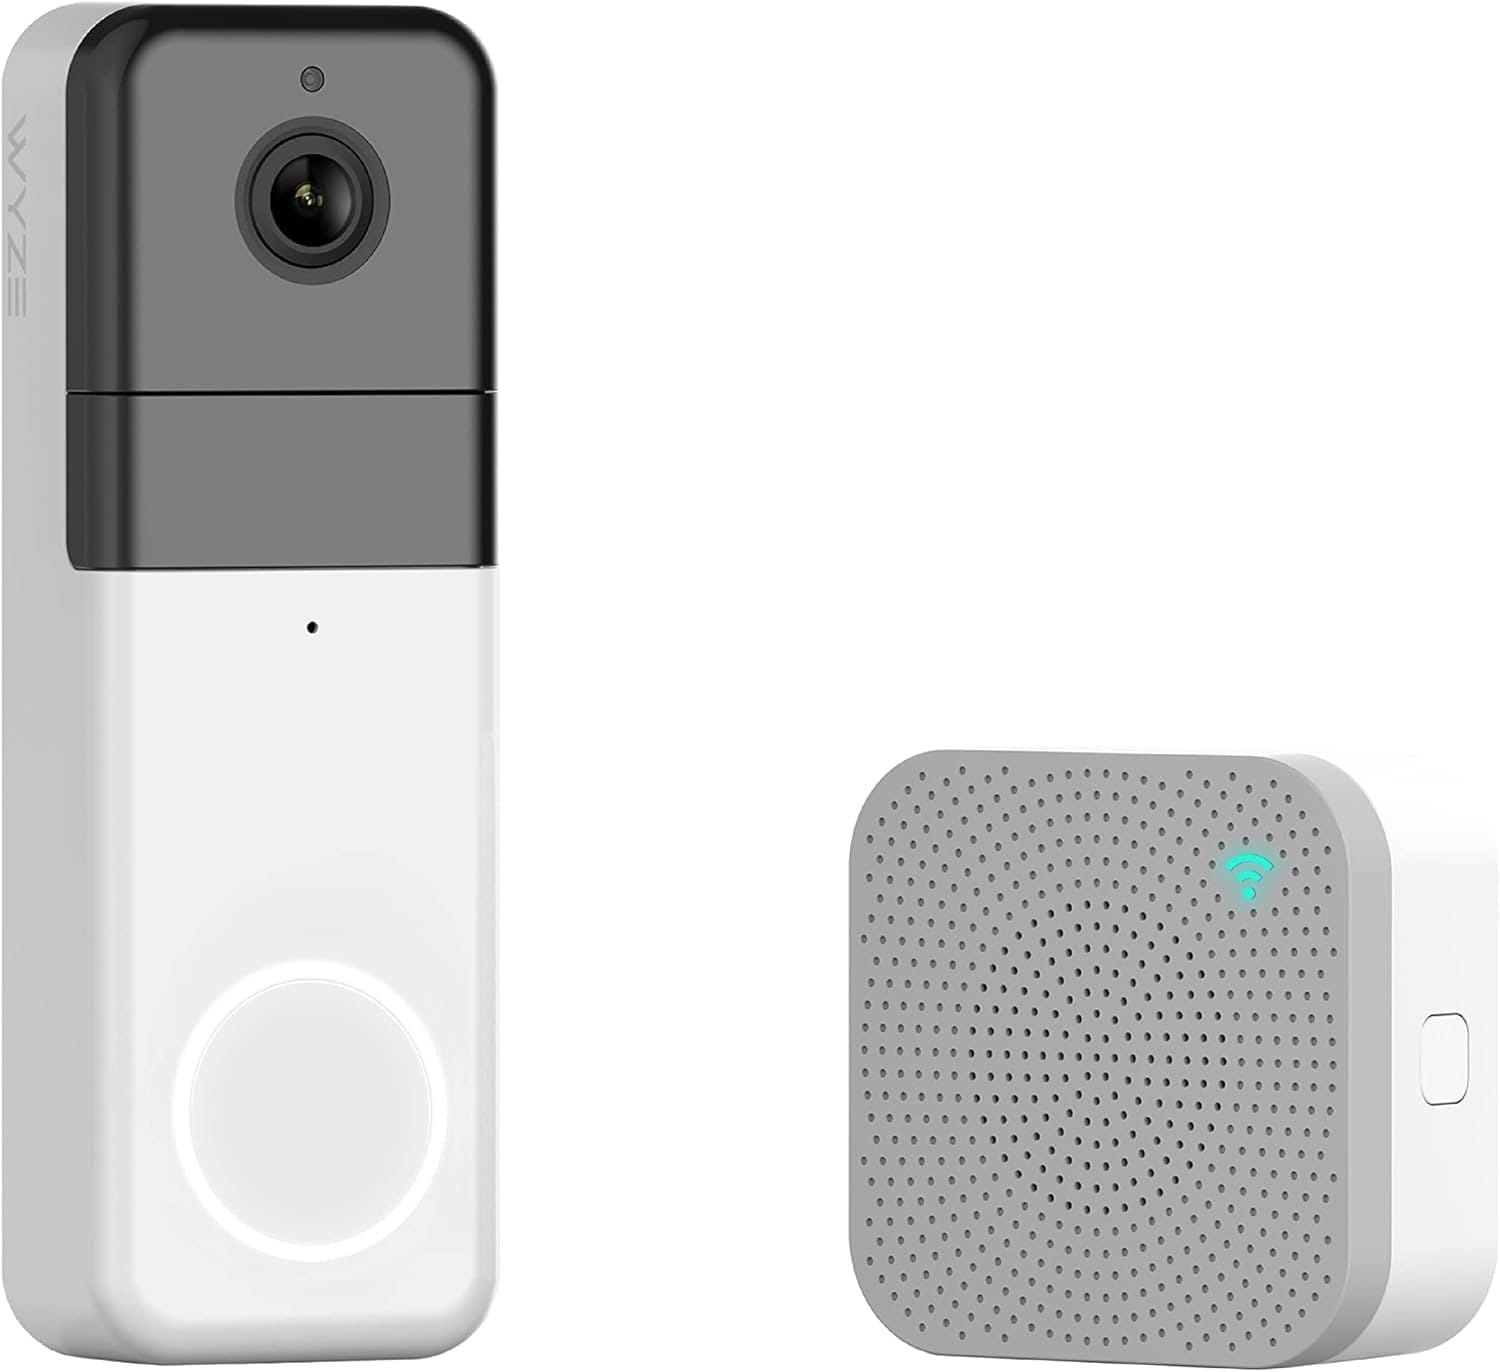 Read more about the article Wireless Doorbell Showdown: Wyze vs Blink vs Ring